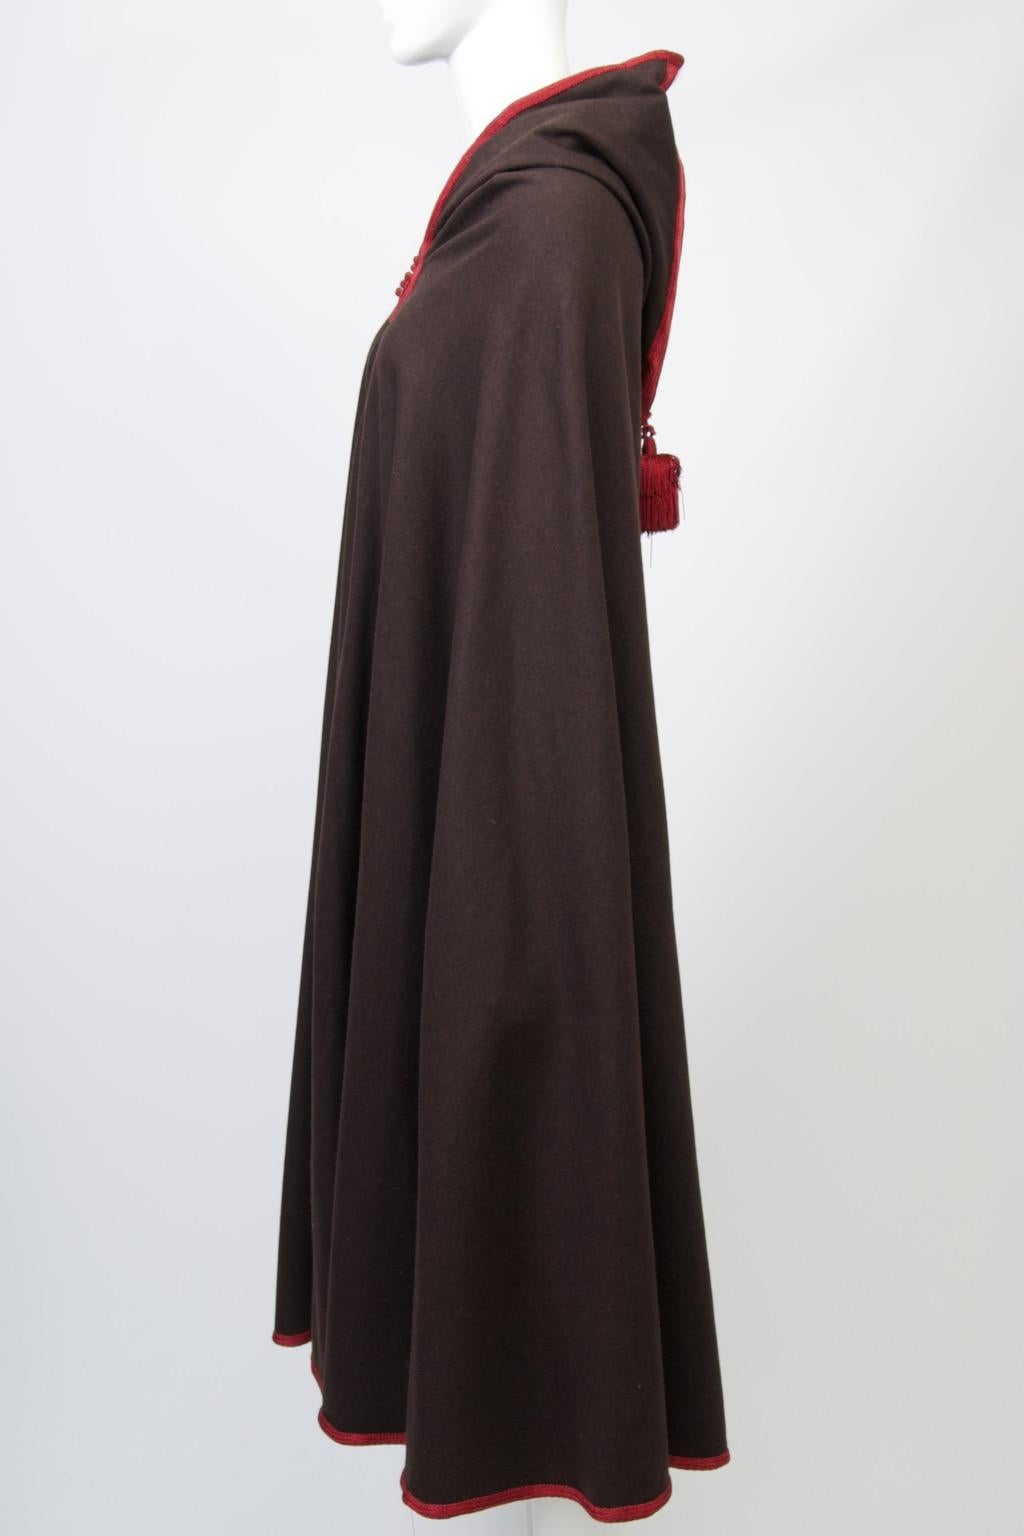 YSL 1970s Cape, Moroccan Collection For Sale 1